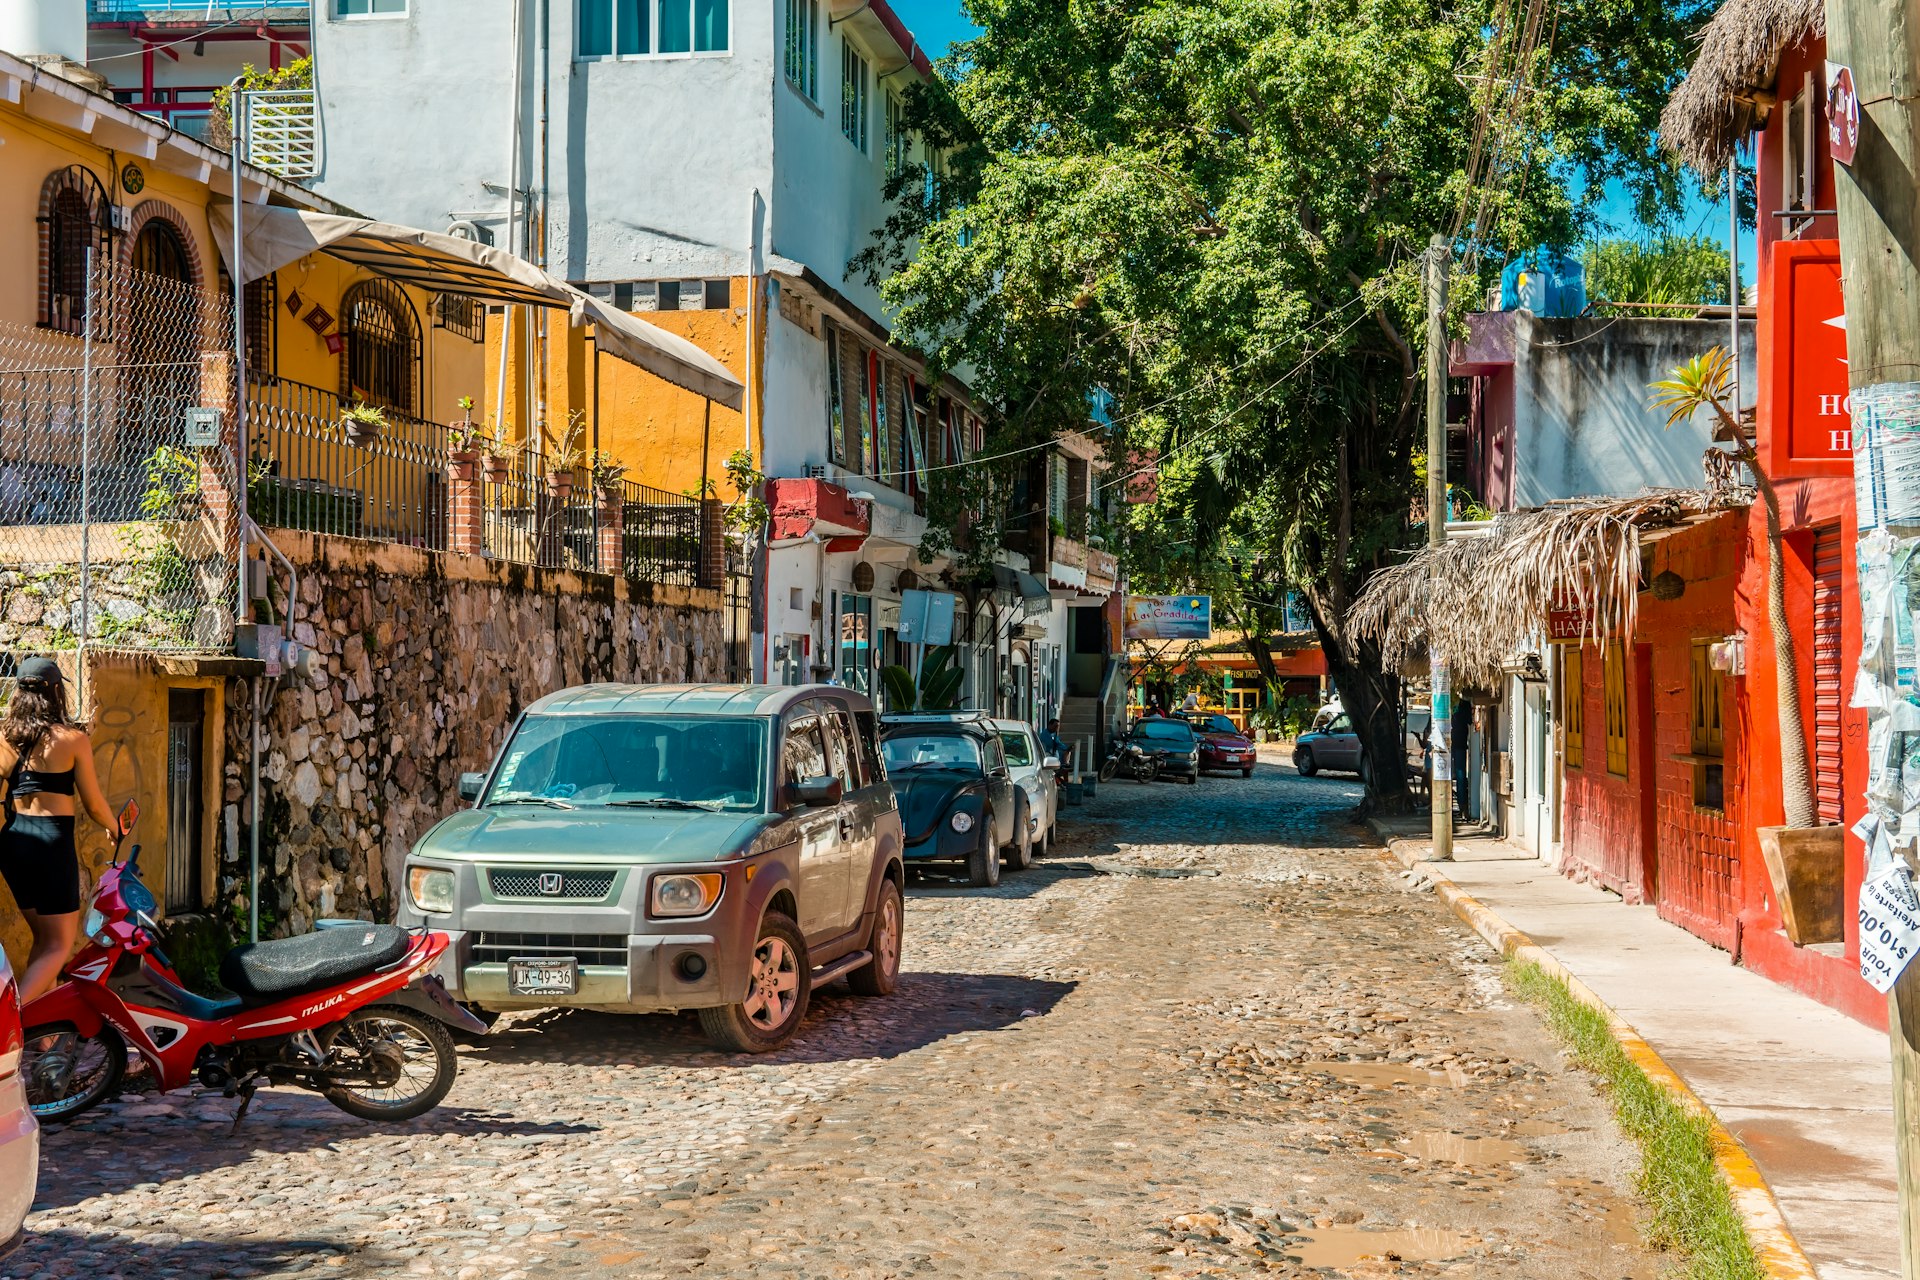 Street photography of cars and colorful buildings in Pueblo Magico, Sayulita